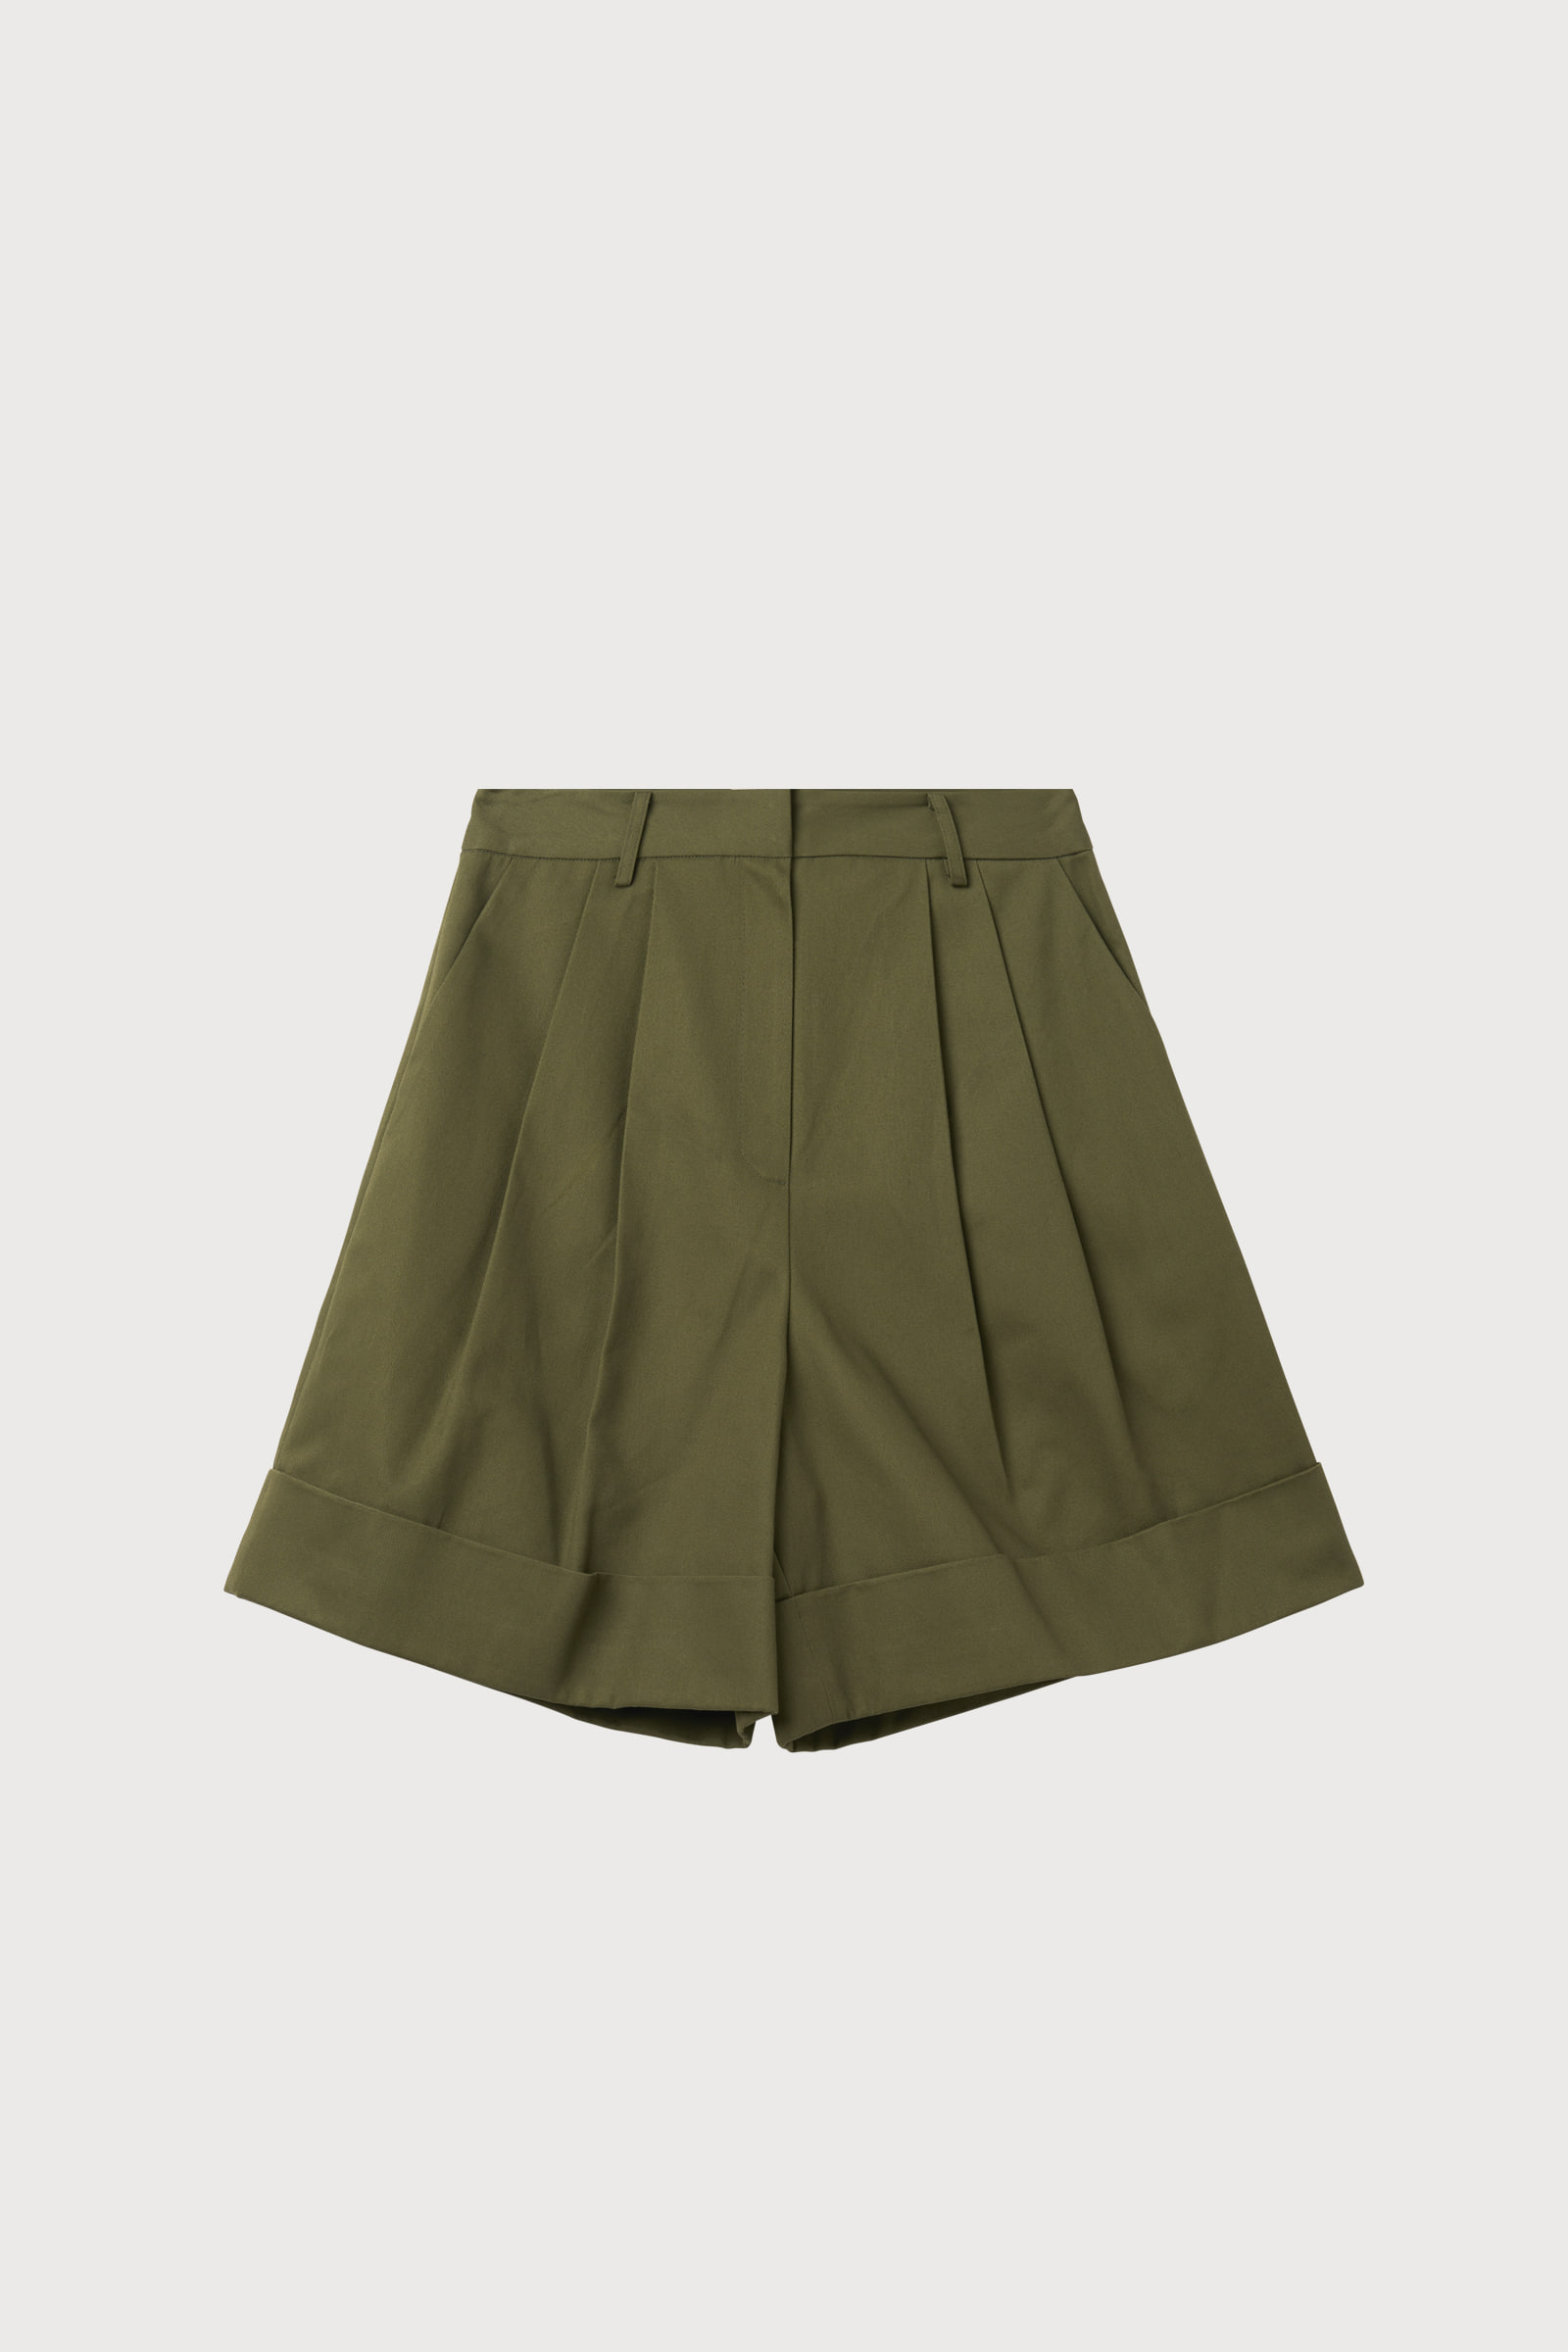 TRAVEL MID SHORTS [2 COLOR]